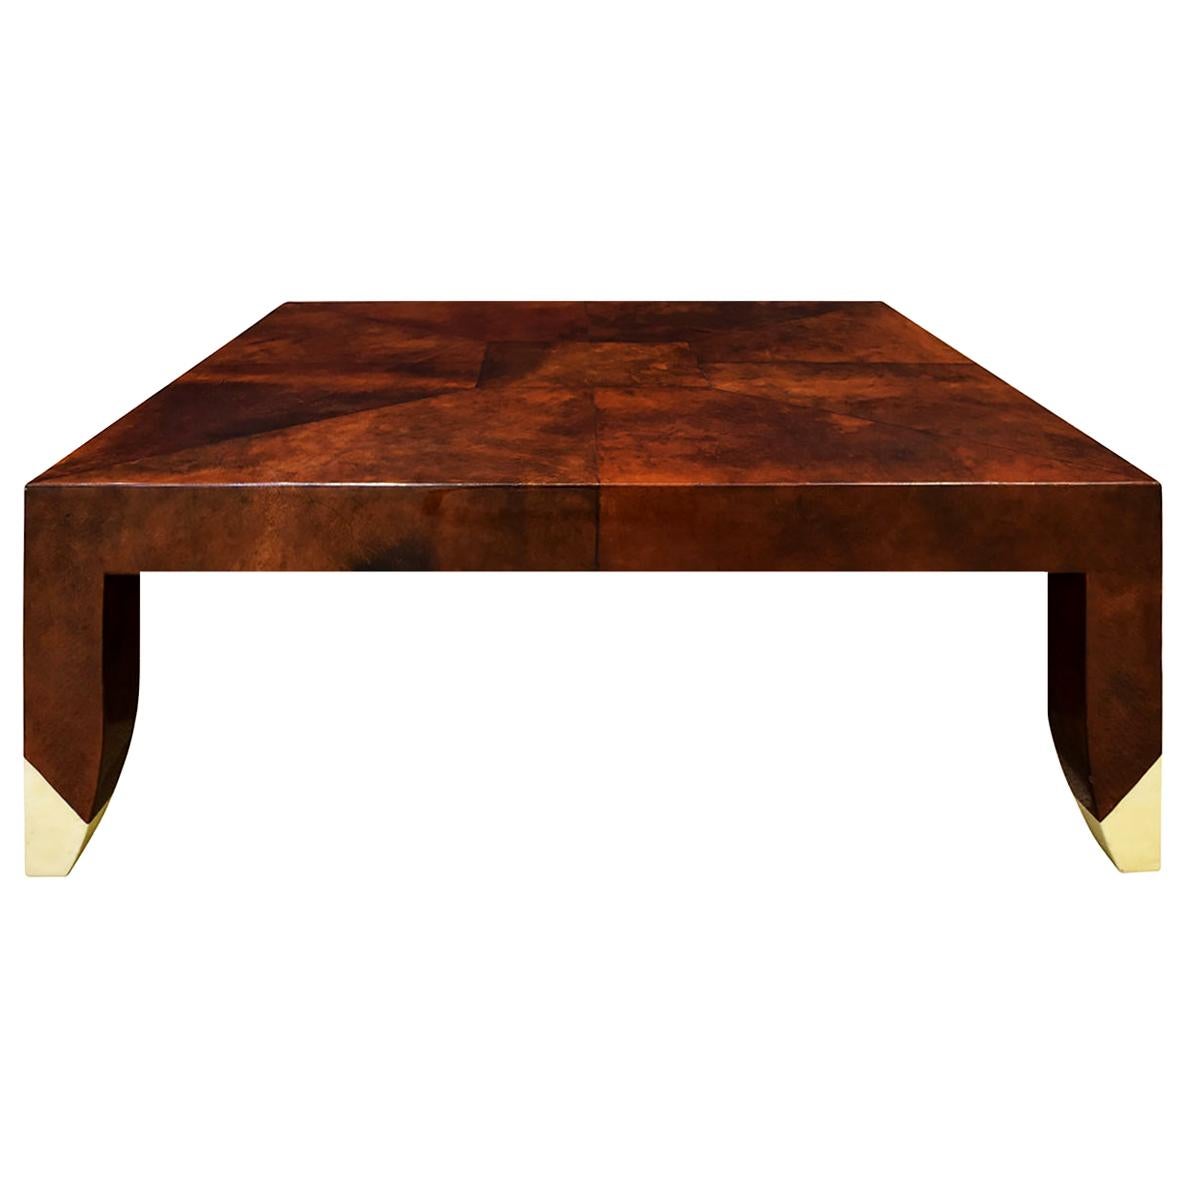 Karl Springer "Bristol Coffee Table" in Lacquered Goatskin circa 1990 'Signed'